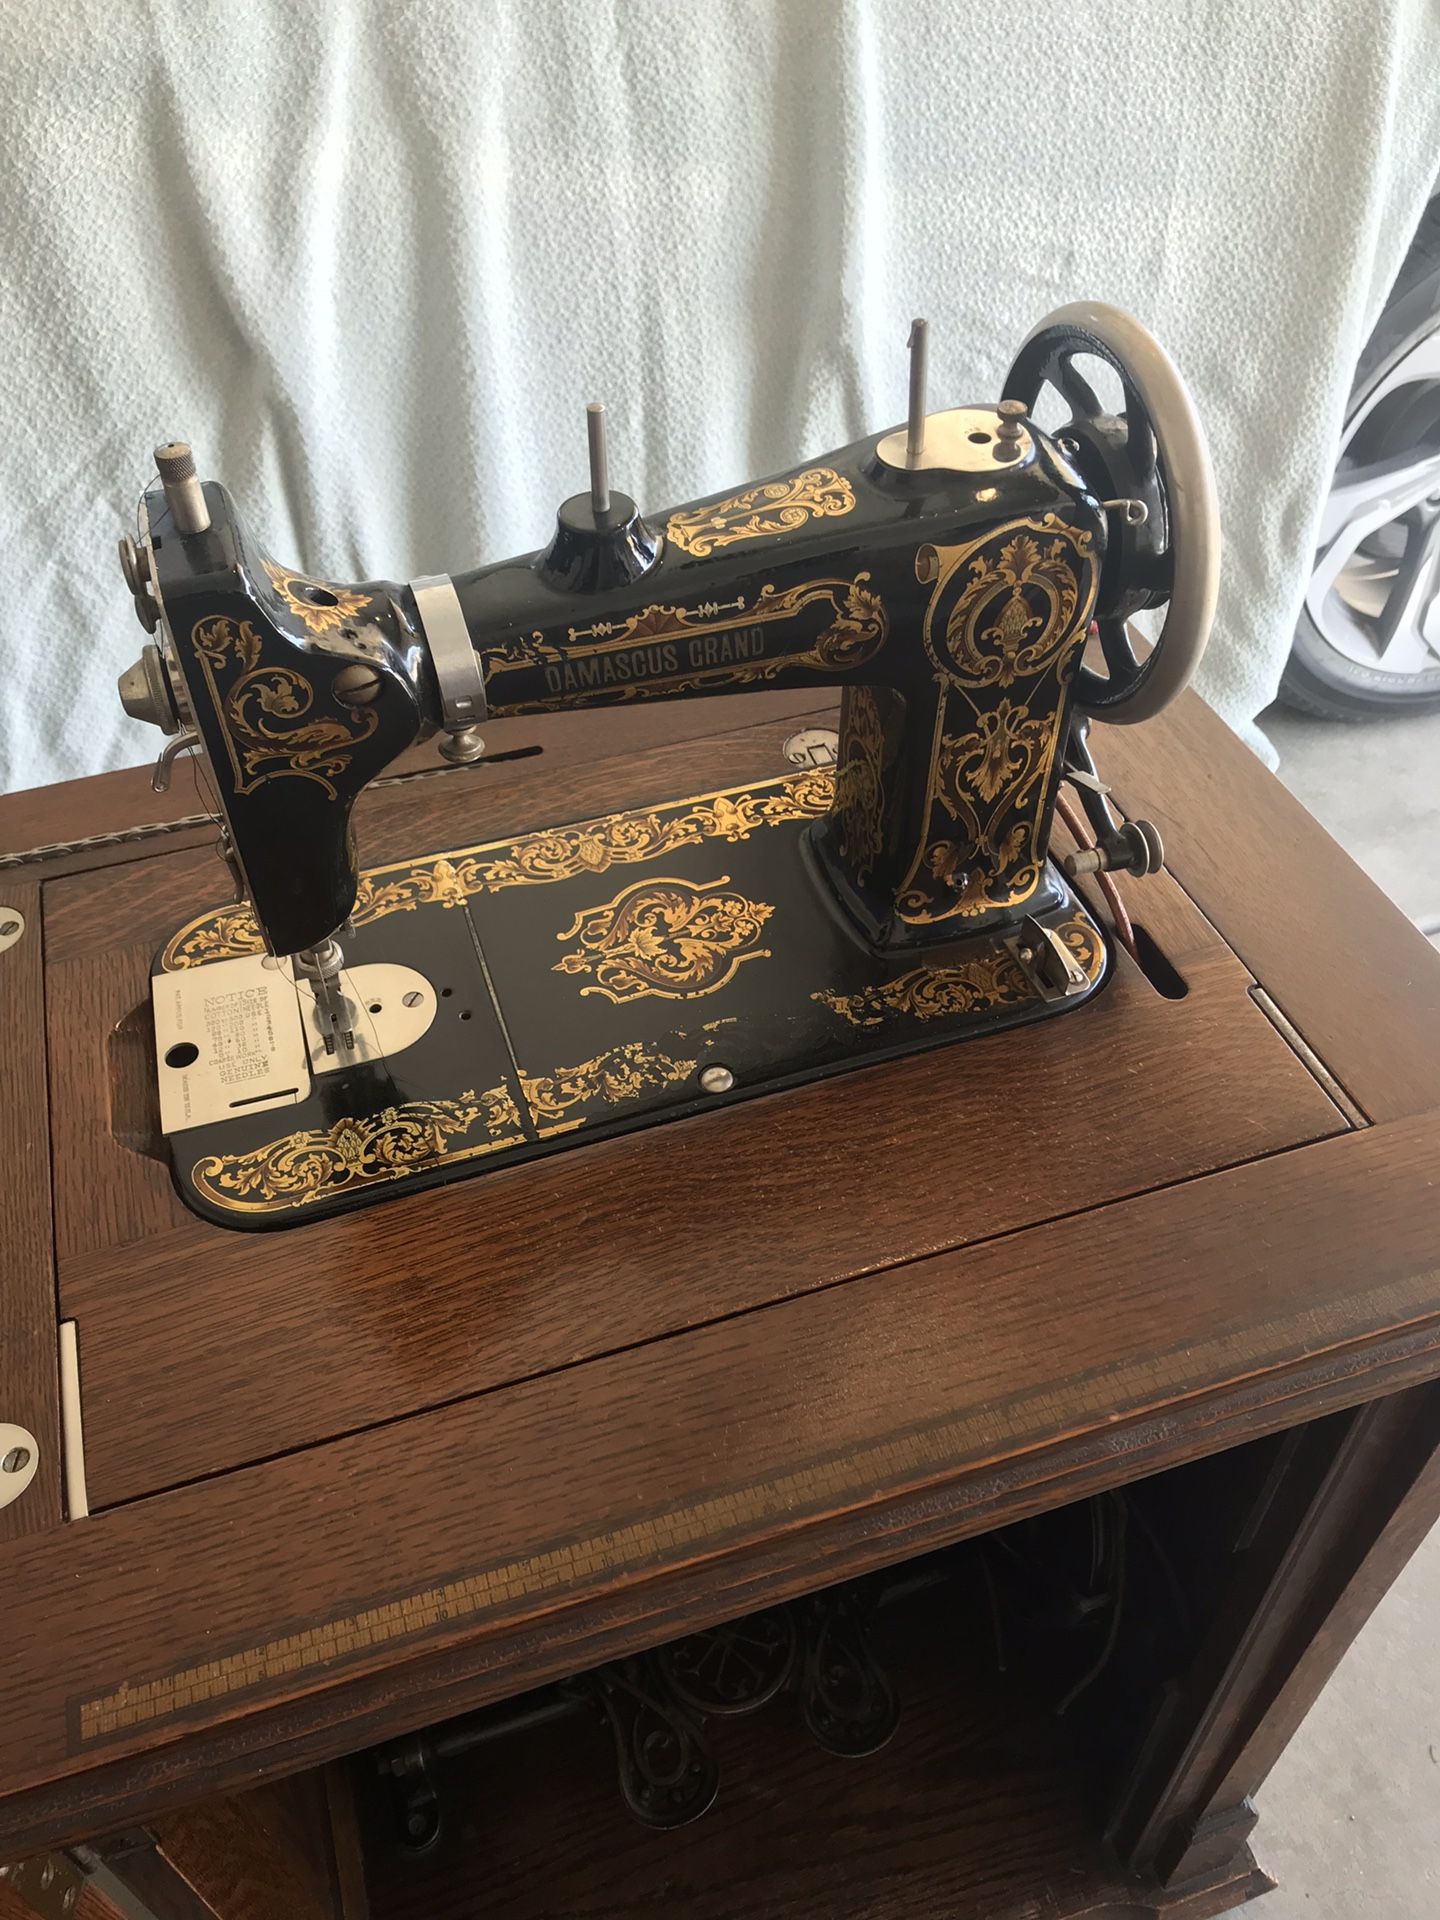 Vintage Sewing Machine with Cabinet